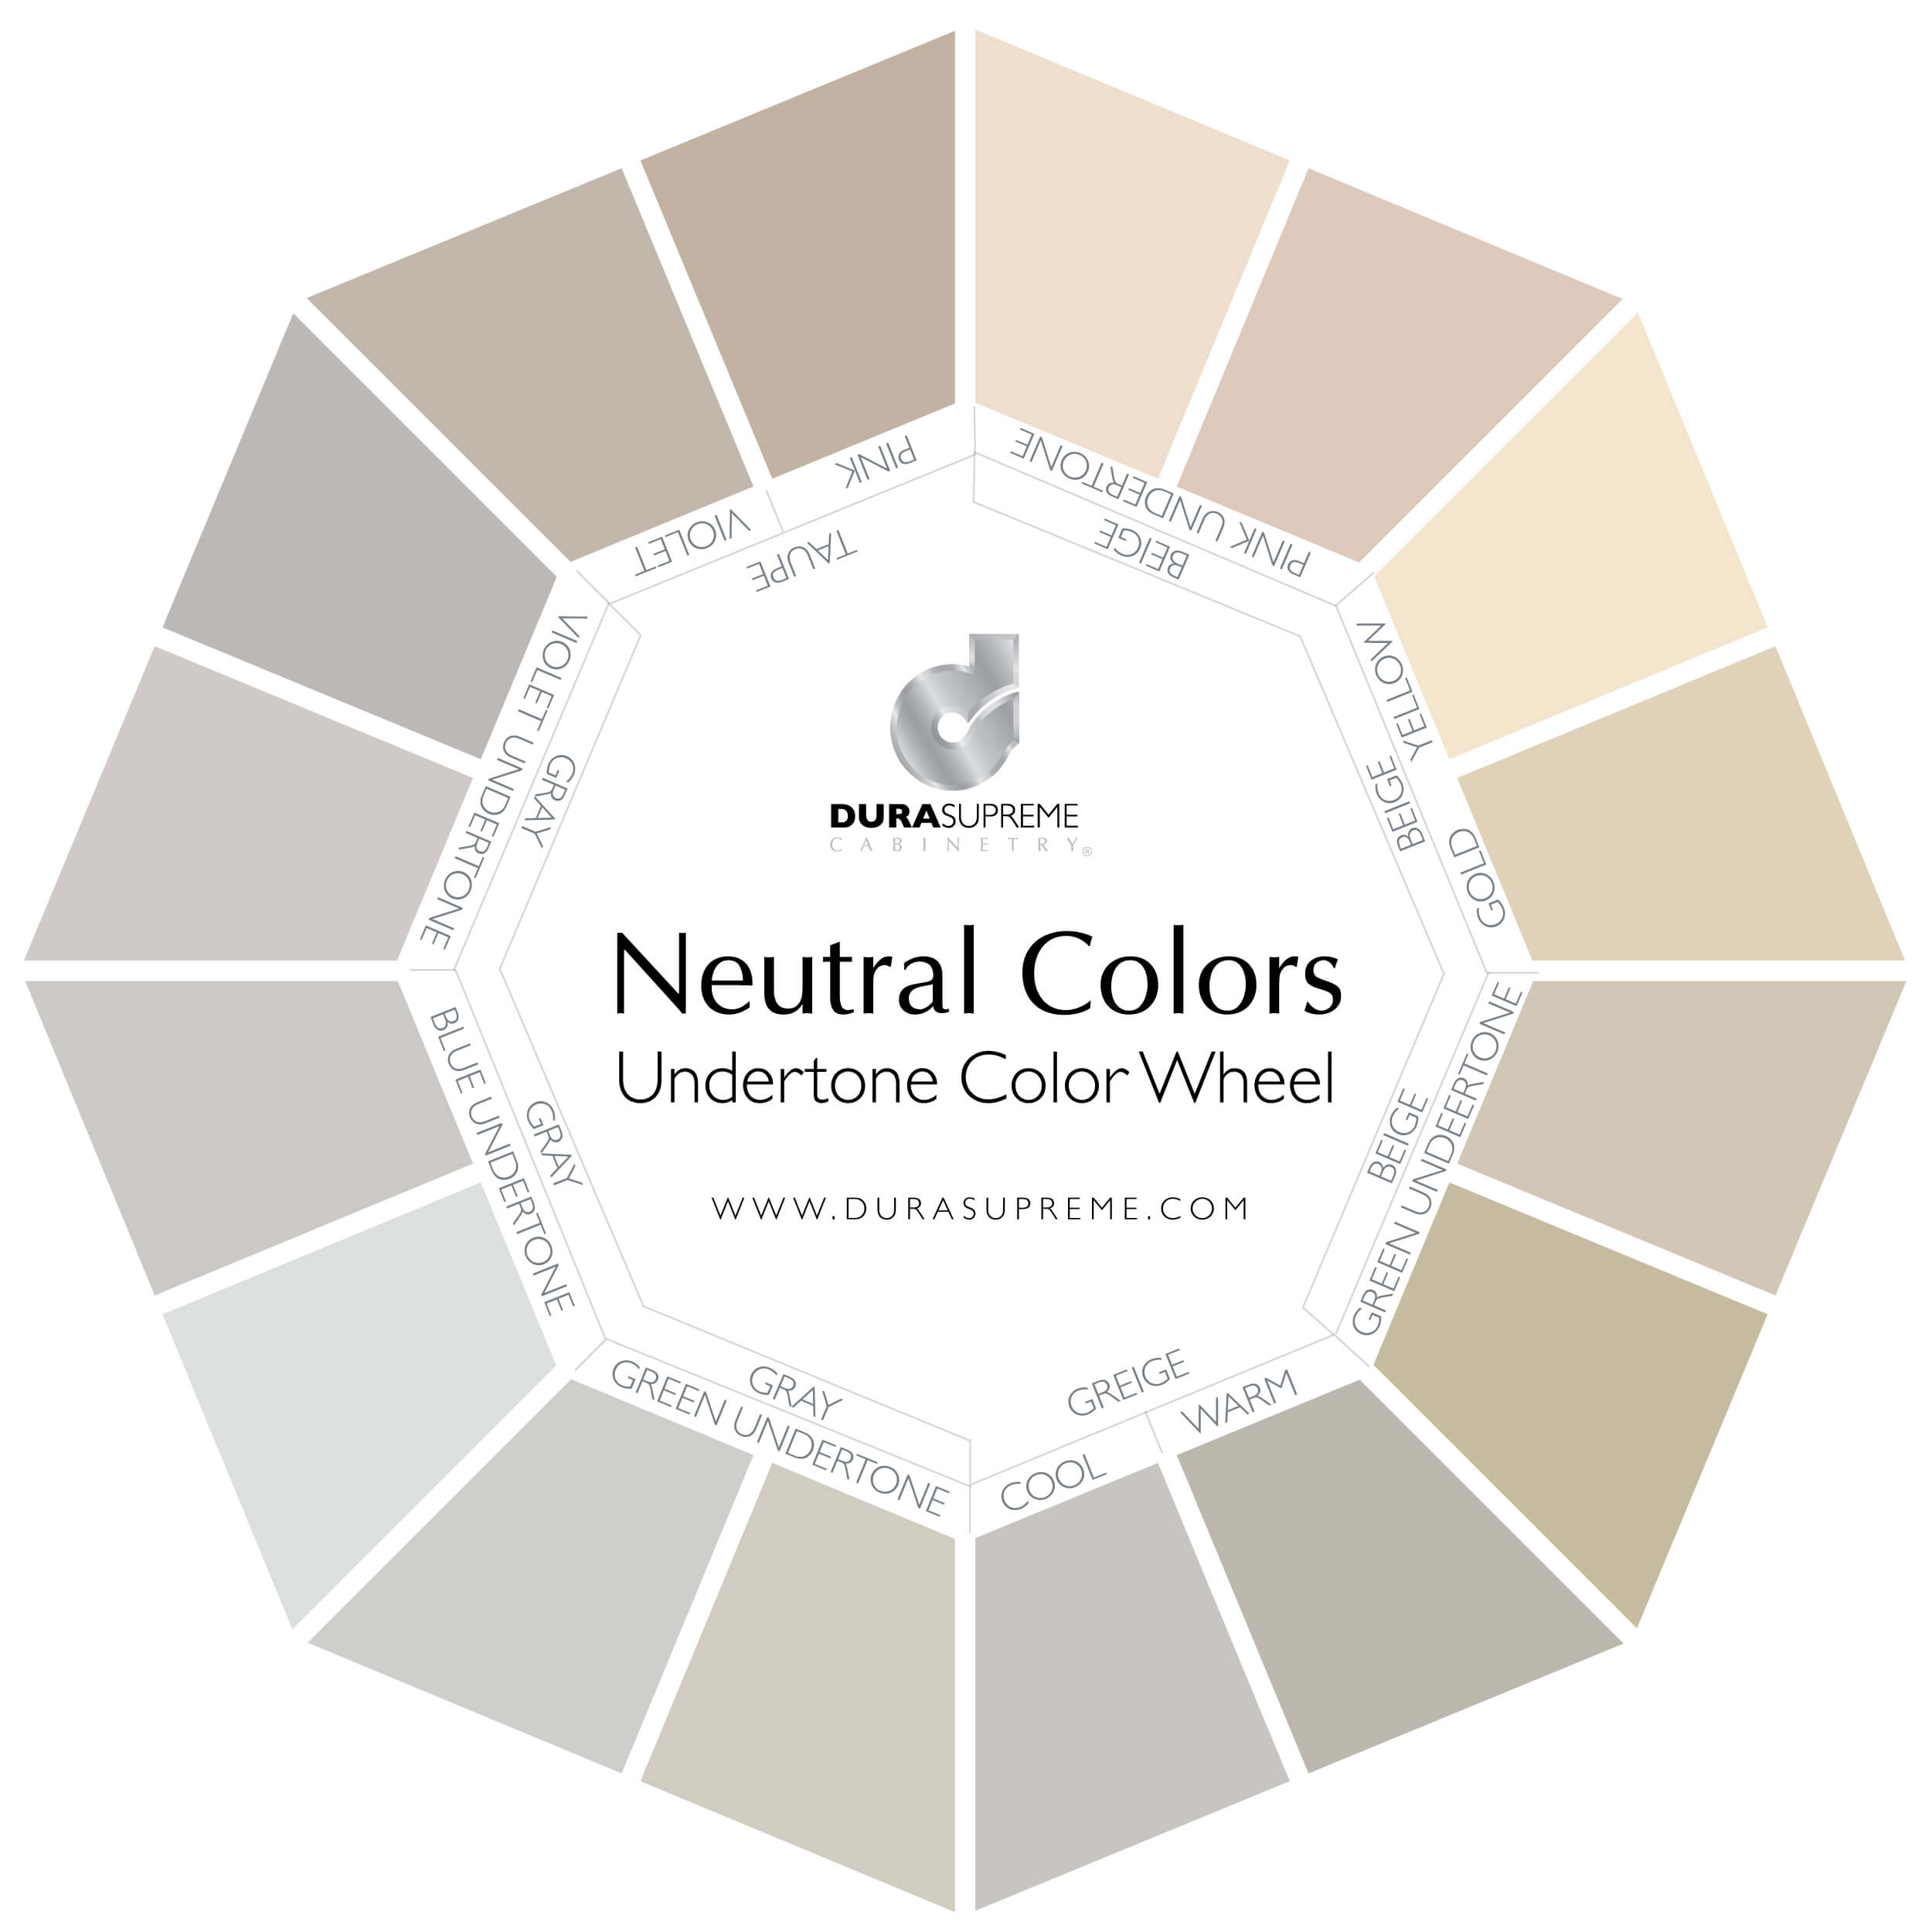 Color Wheel for identifying undertones for neutral colors including gray, beige, taupe, and greige undertones.